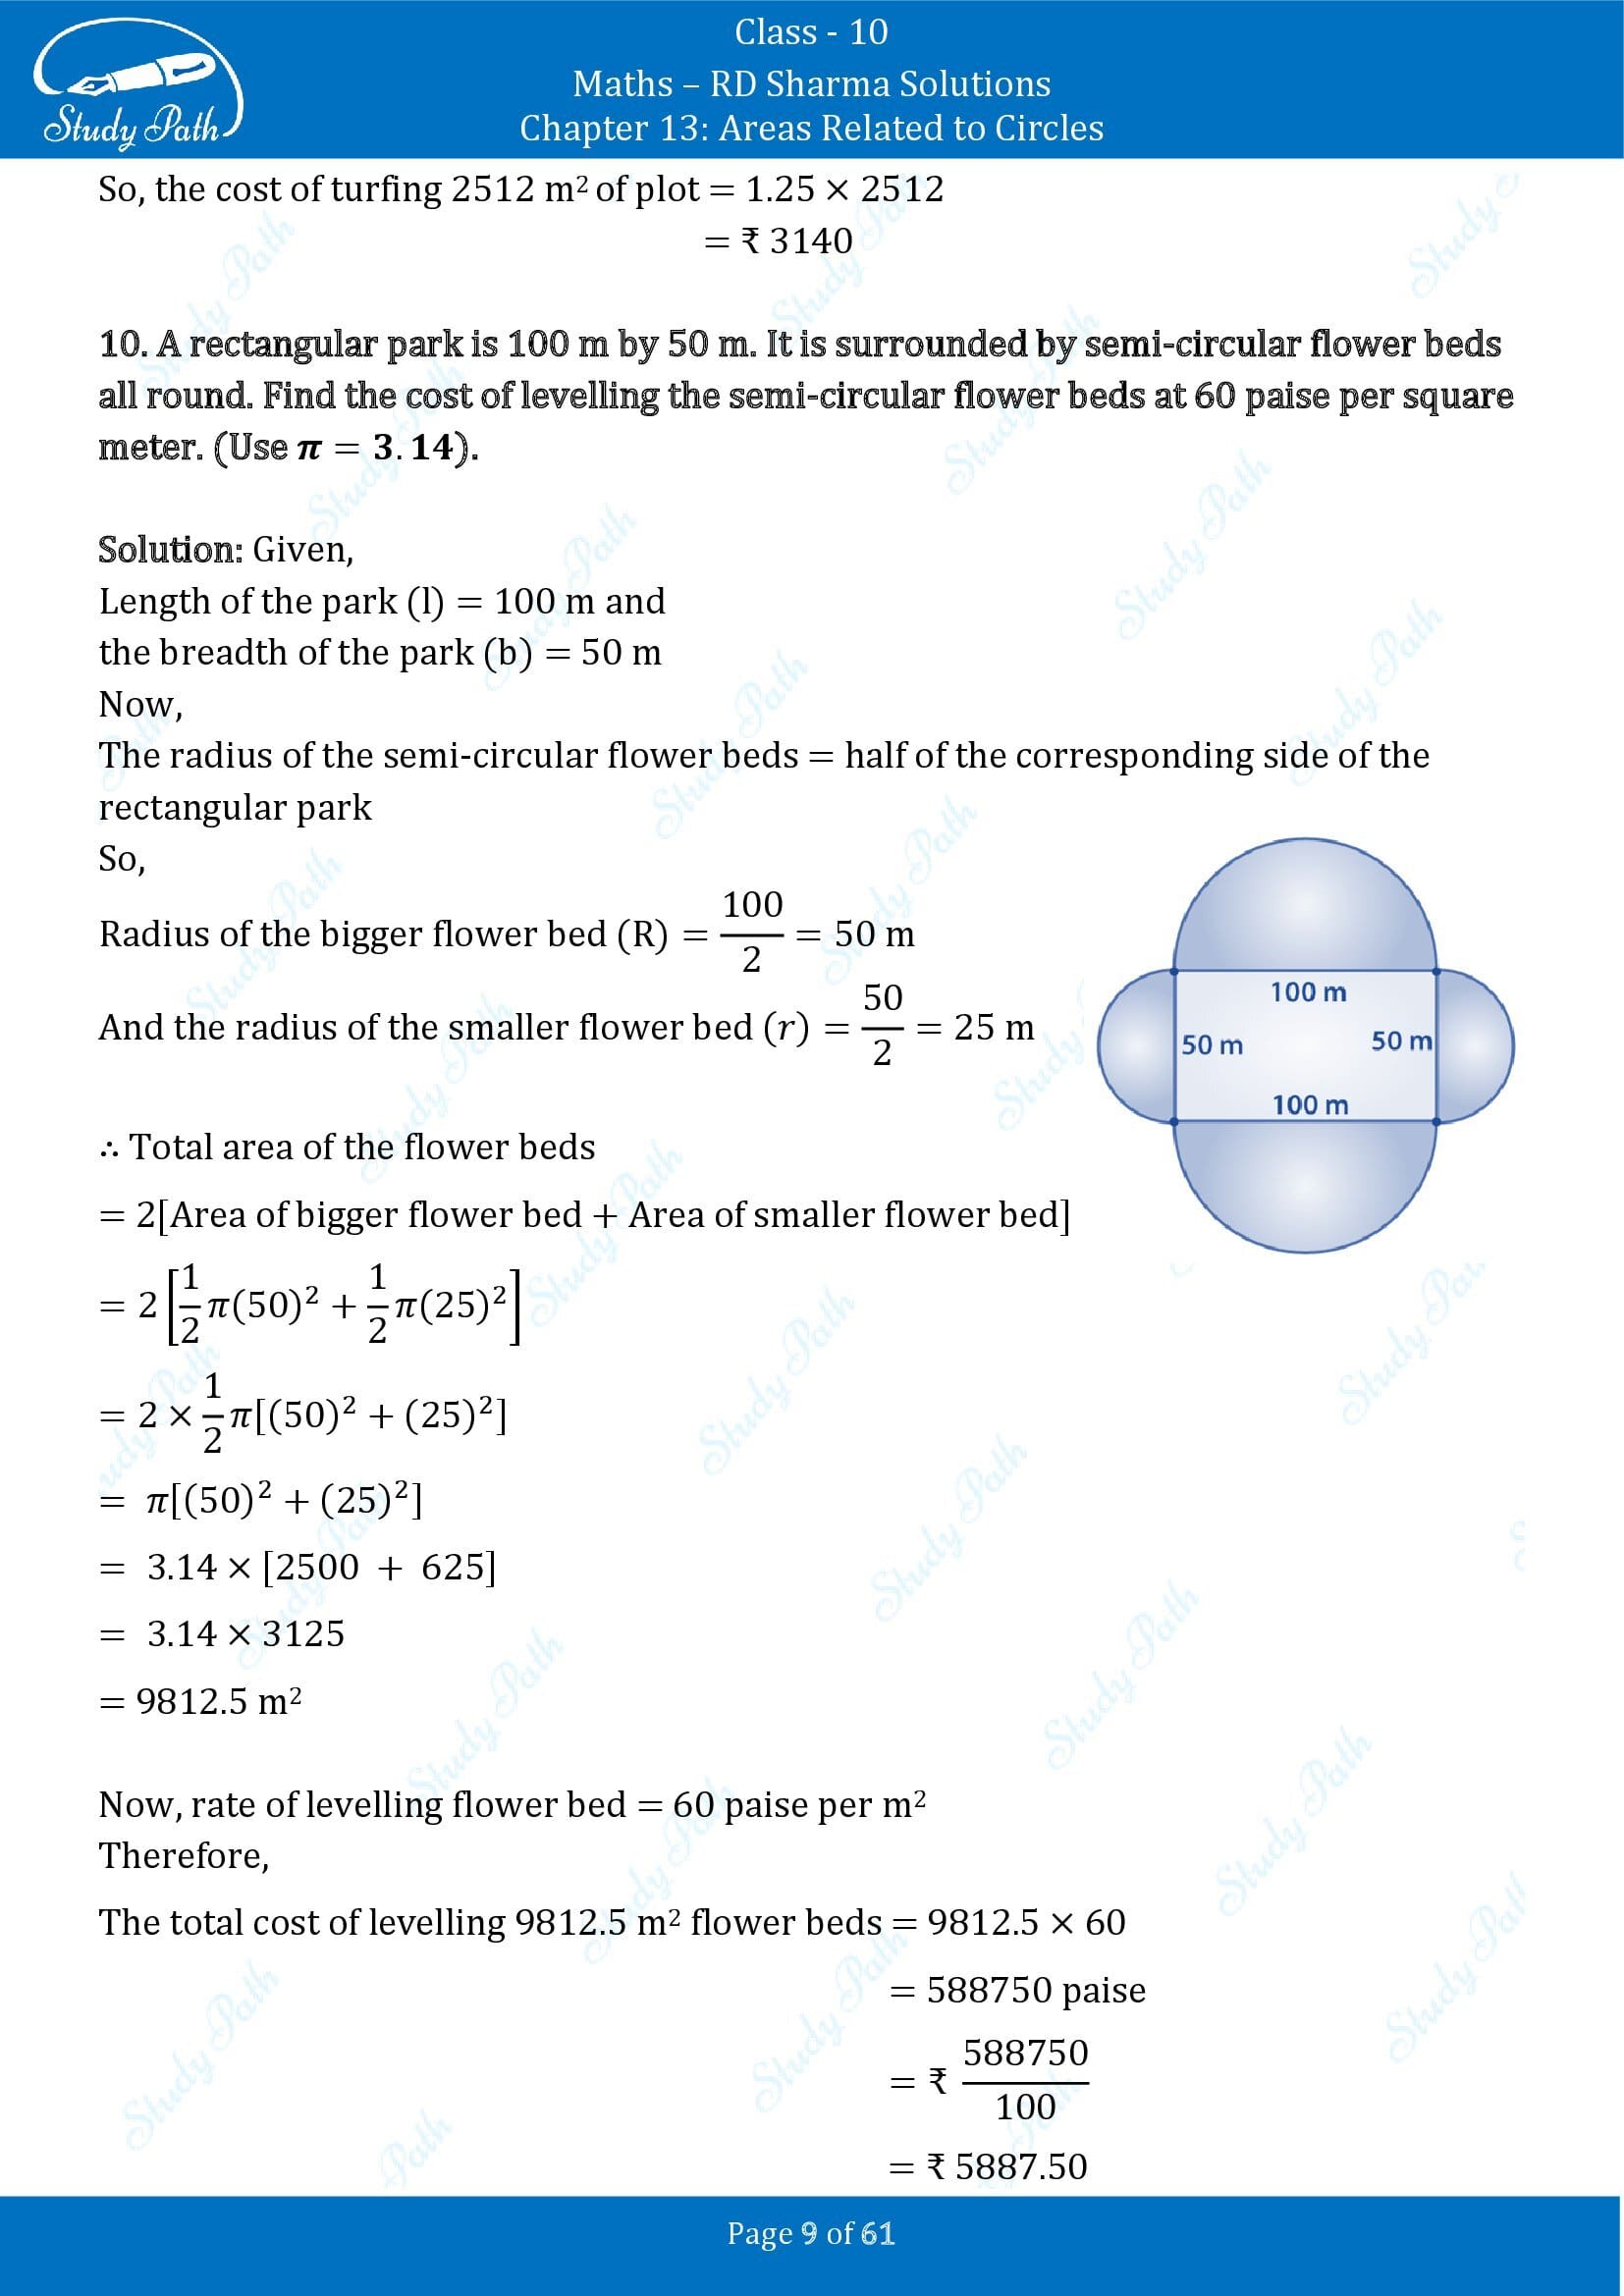 RD Sharma Solutions Class 10 Chapter 13 Areas Related to Circles Exercise 13.4 00009